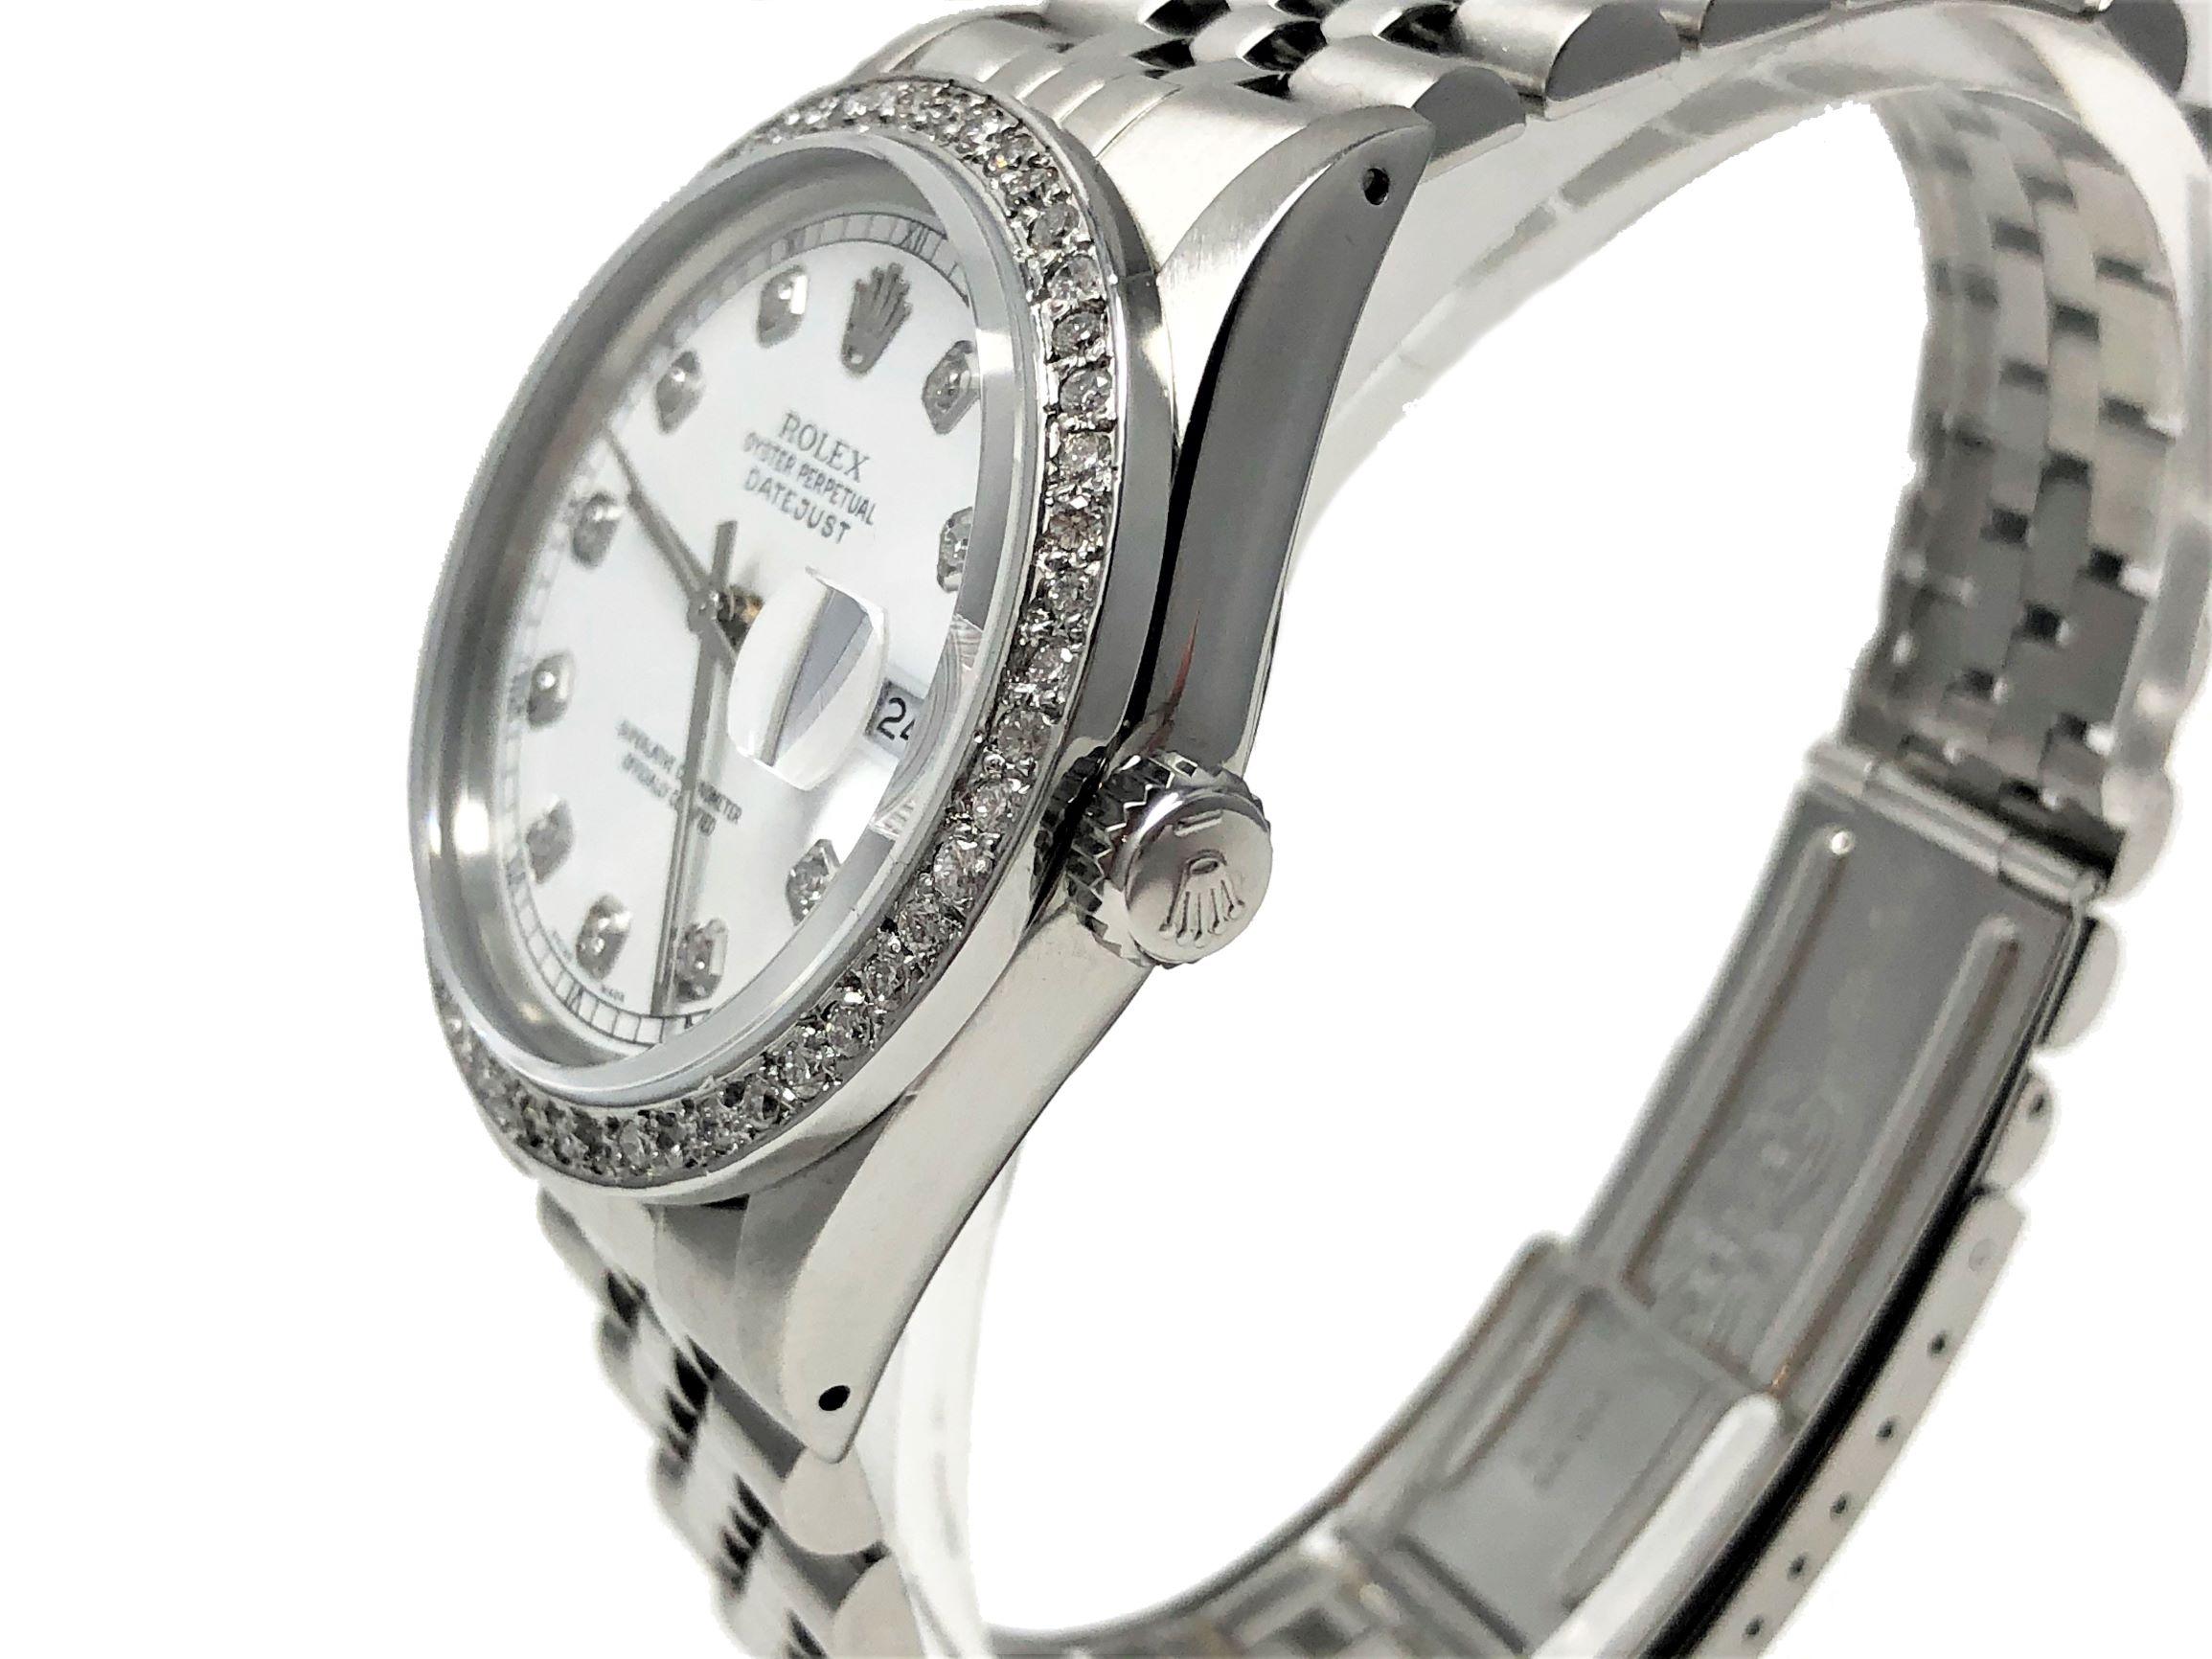 Brand - Rolex
Gender - Unisex
Model - 16014 Datejust
Metals - Stainless steel
Case size - 36mm
Bezel - Steel Diamond
Crystal - sapphire
Movement - Automatic cal 3035
Dial - Refinished White diamond
Wrist band - Steel jubilee 
Wrist size - 7 1/2